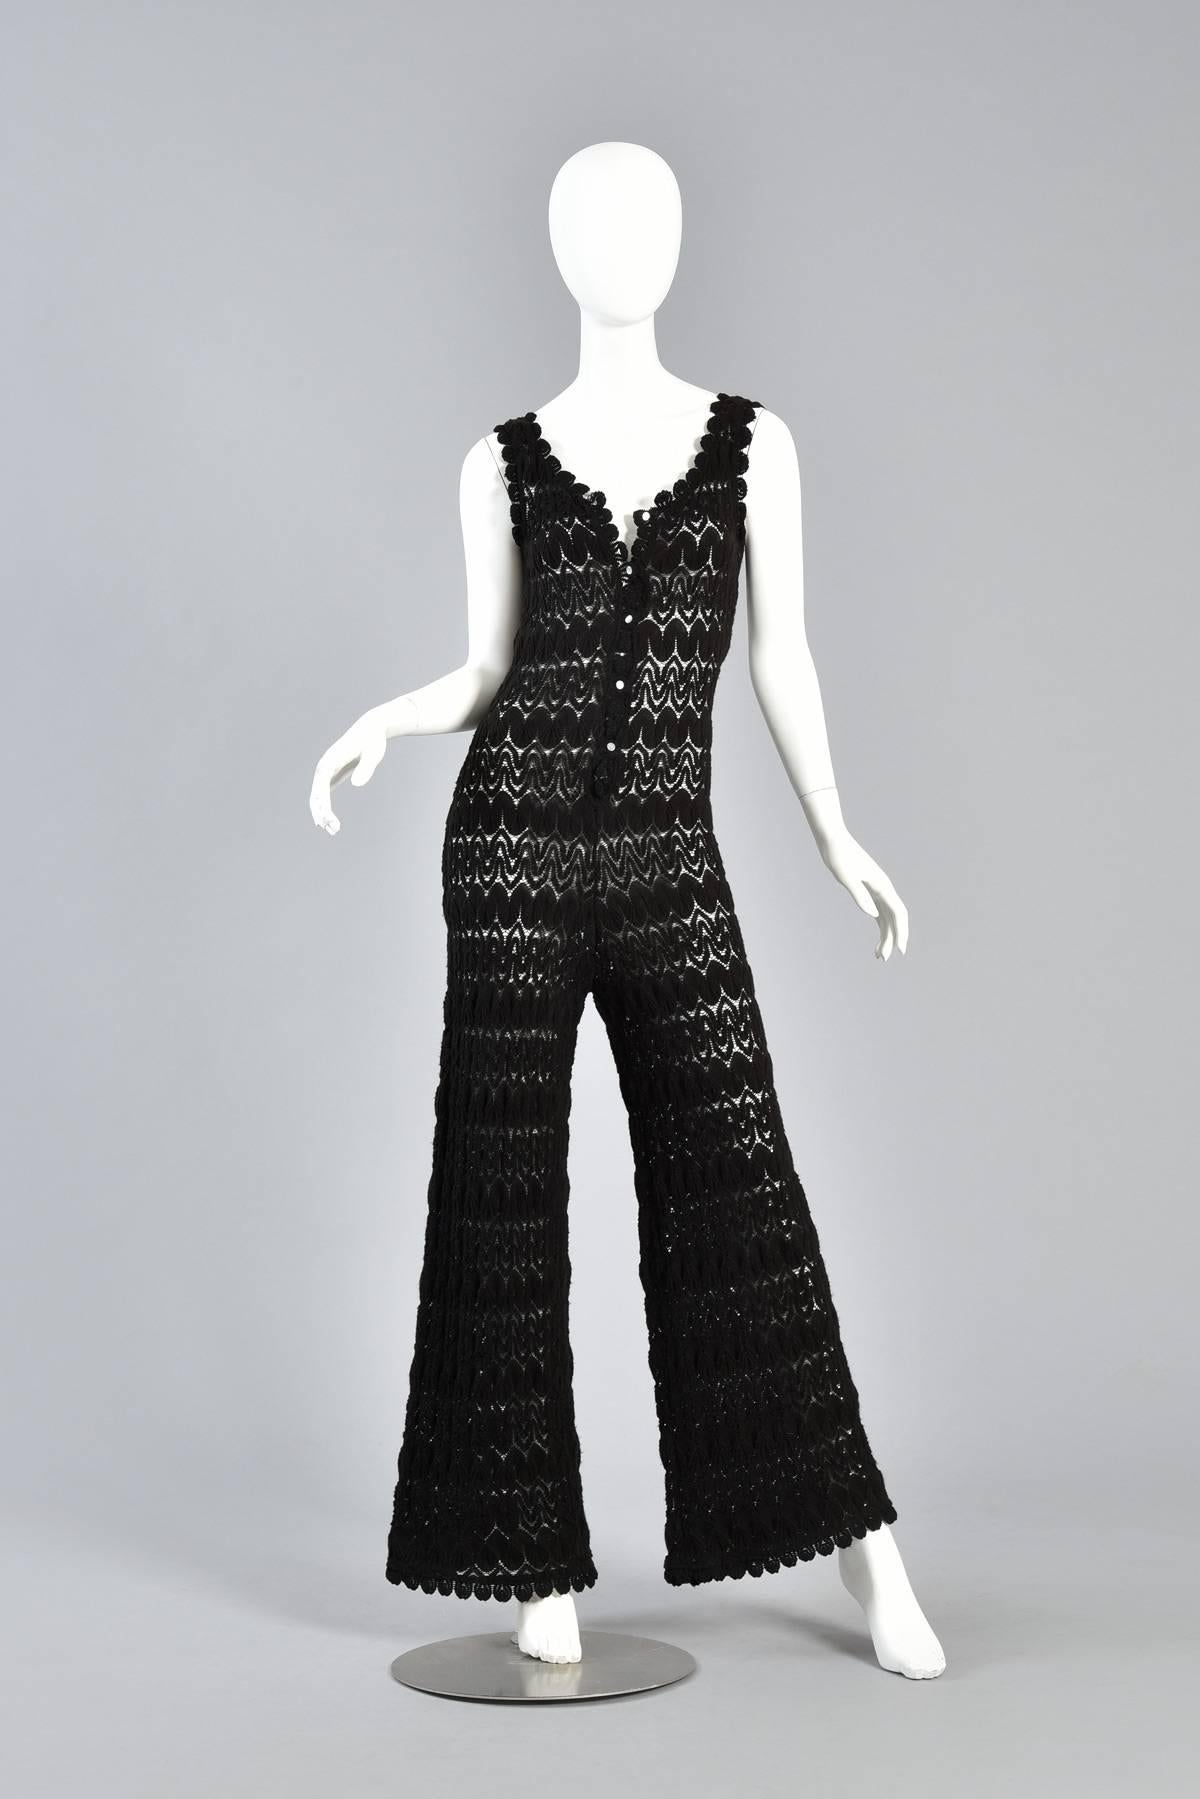 Exceptional vintage 1960s black hand crocheted/knit jumpsuit. Insanely awesome find! Lightweight and super soft black acrylic knit body with zigzagging chevron pattern. Button up front with tiny pearly buttons and scalloped neckline. Tightly fitted